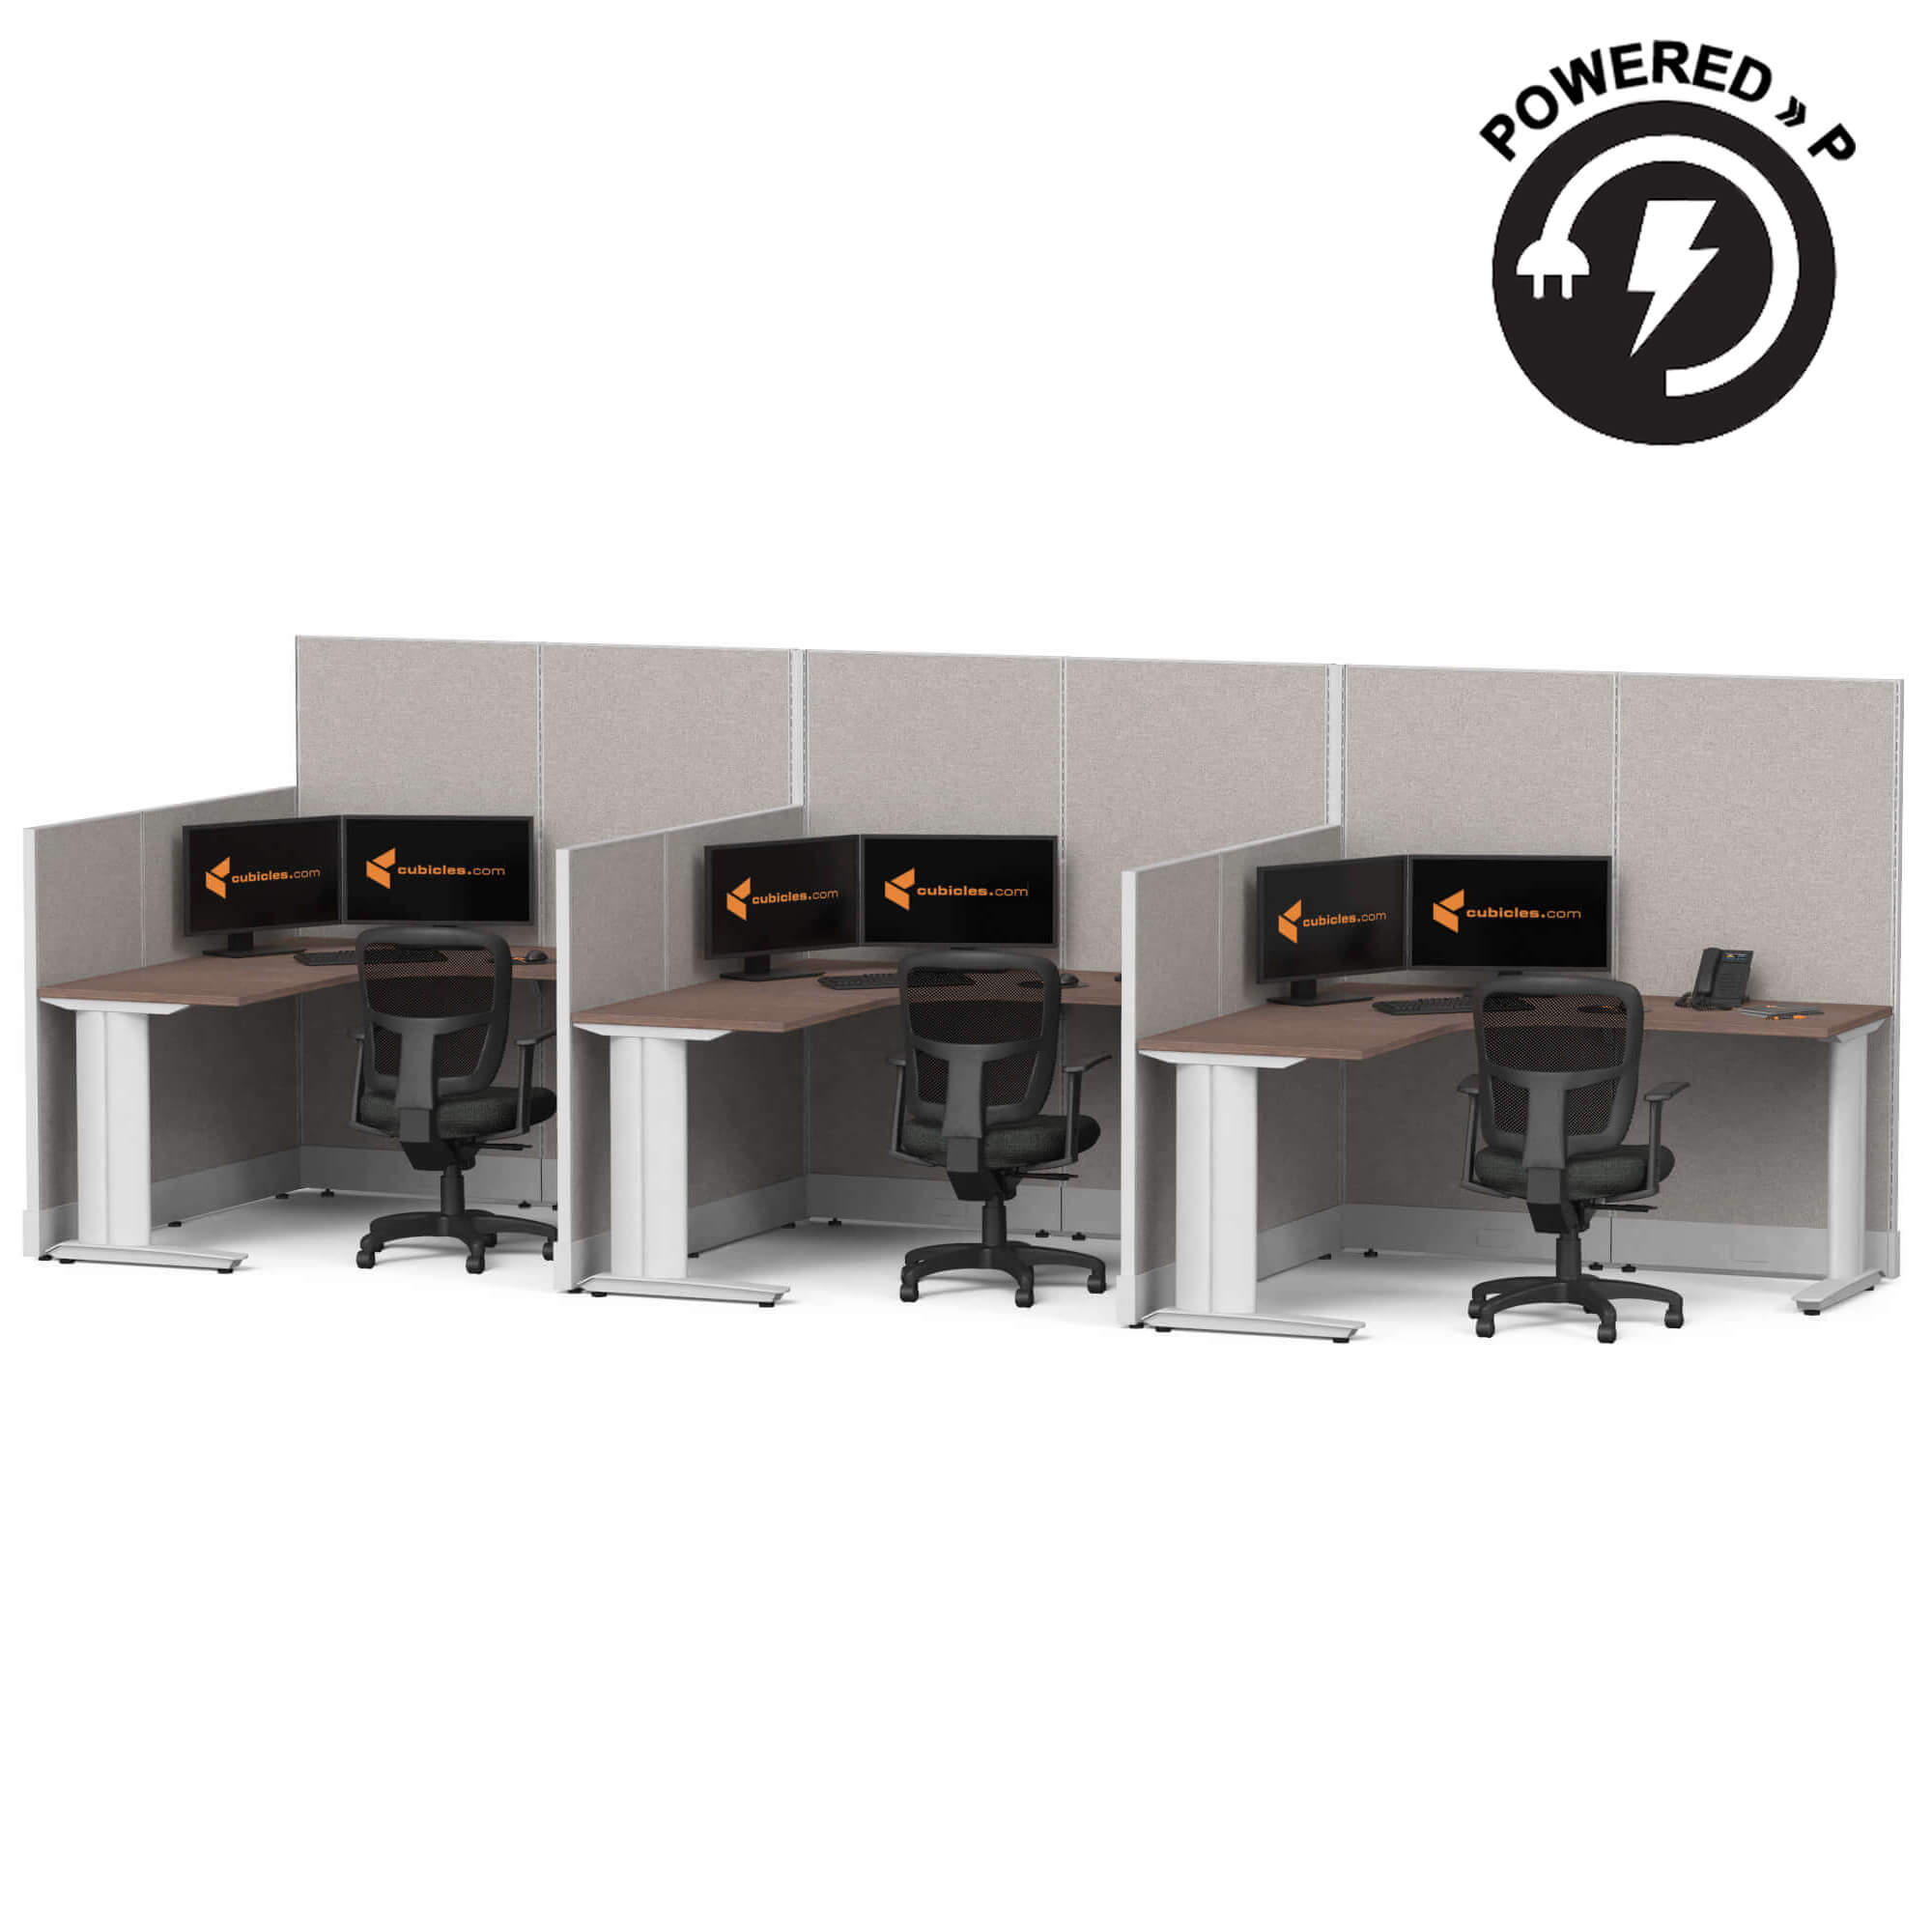 Cubicle desk l shaped 3pack powered